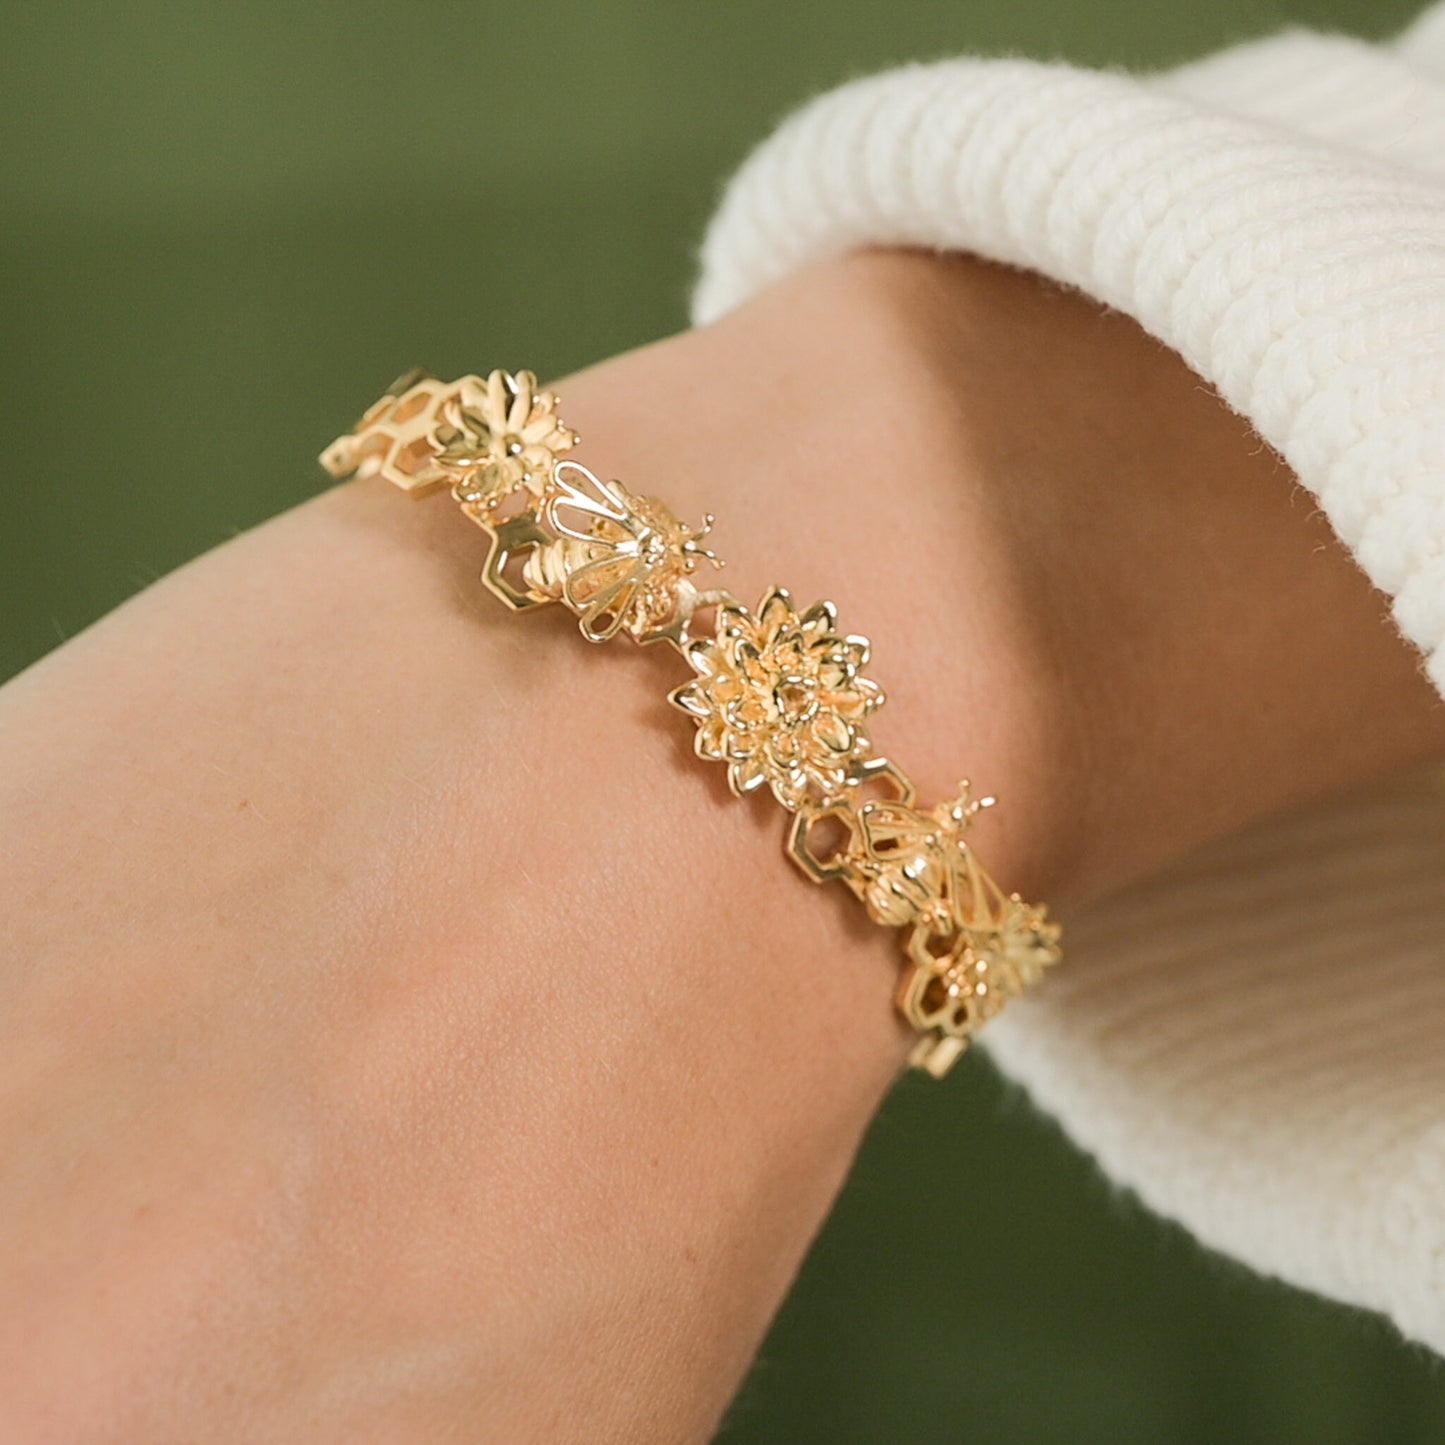 Honey Bee and Flower Cuff